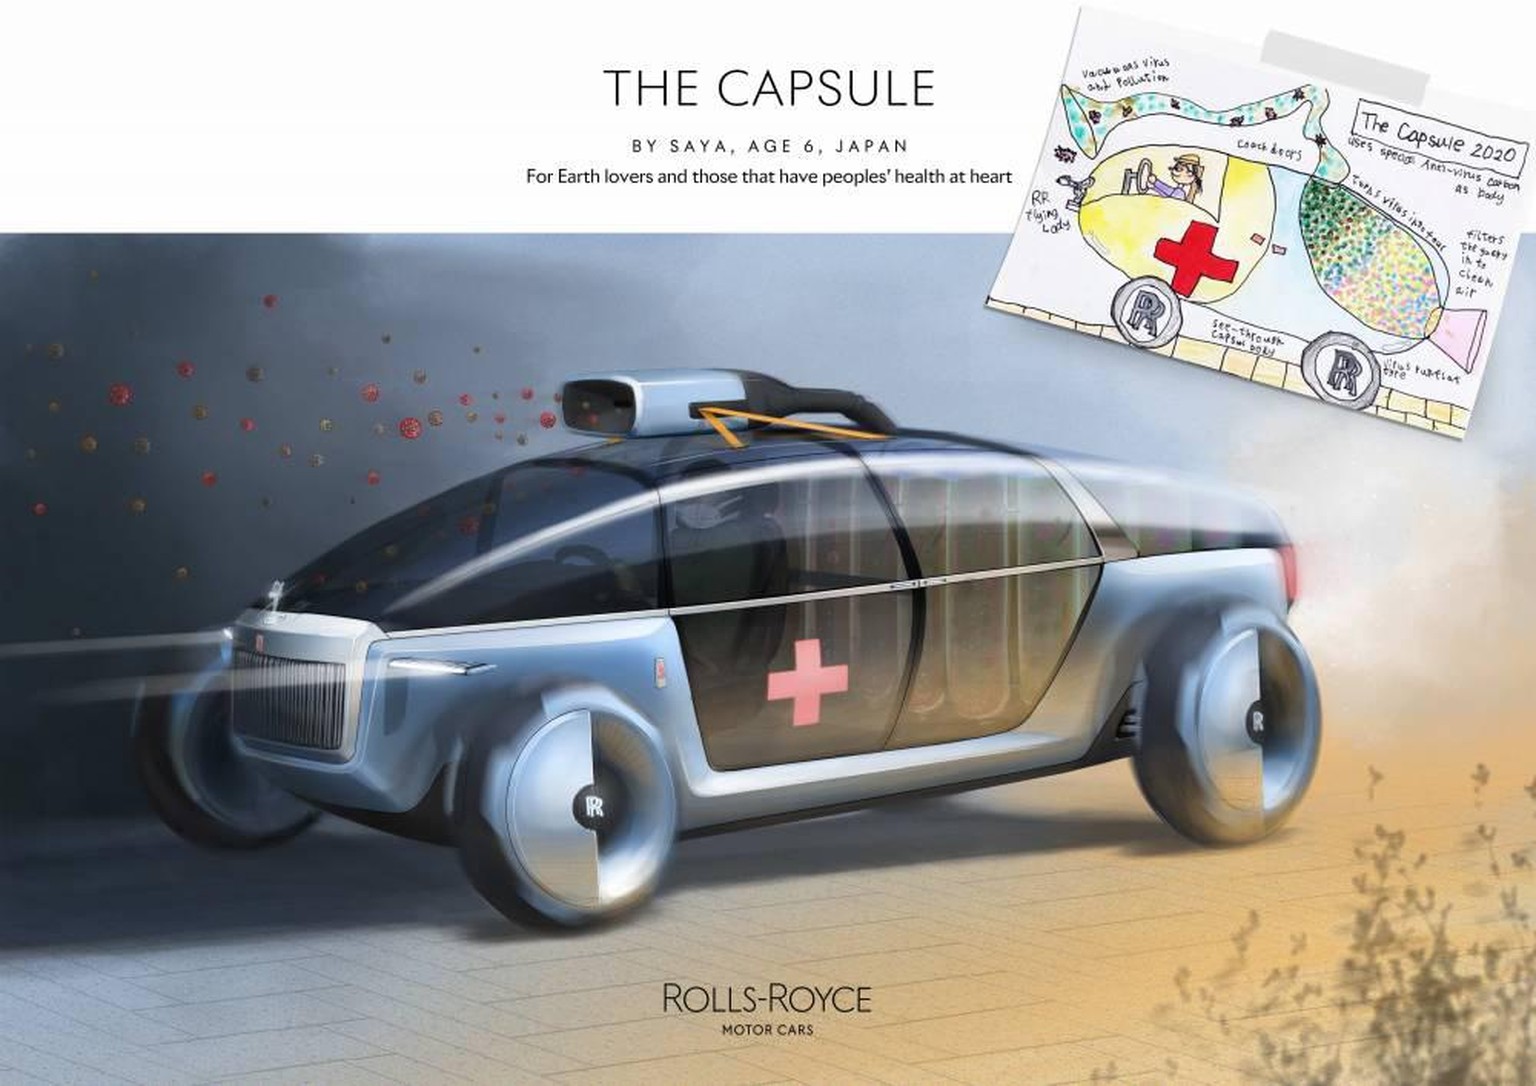 https://rolls-royceyoungdesignercompetition.com/ The capsule Saya age 6 Japan